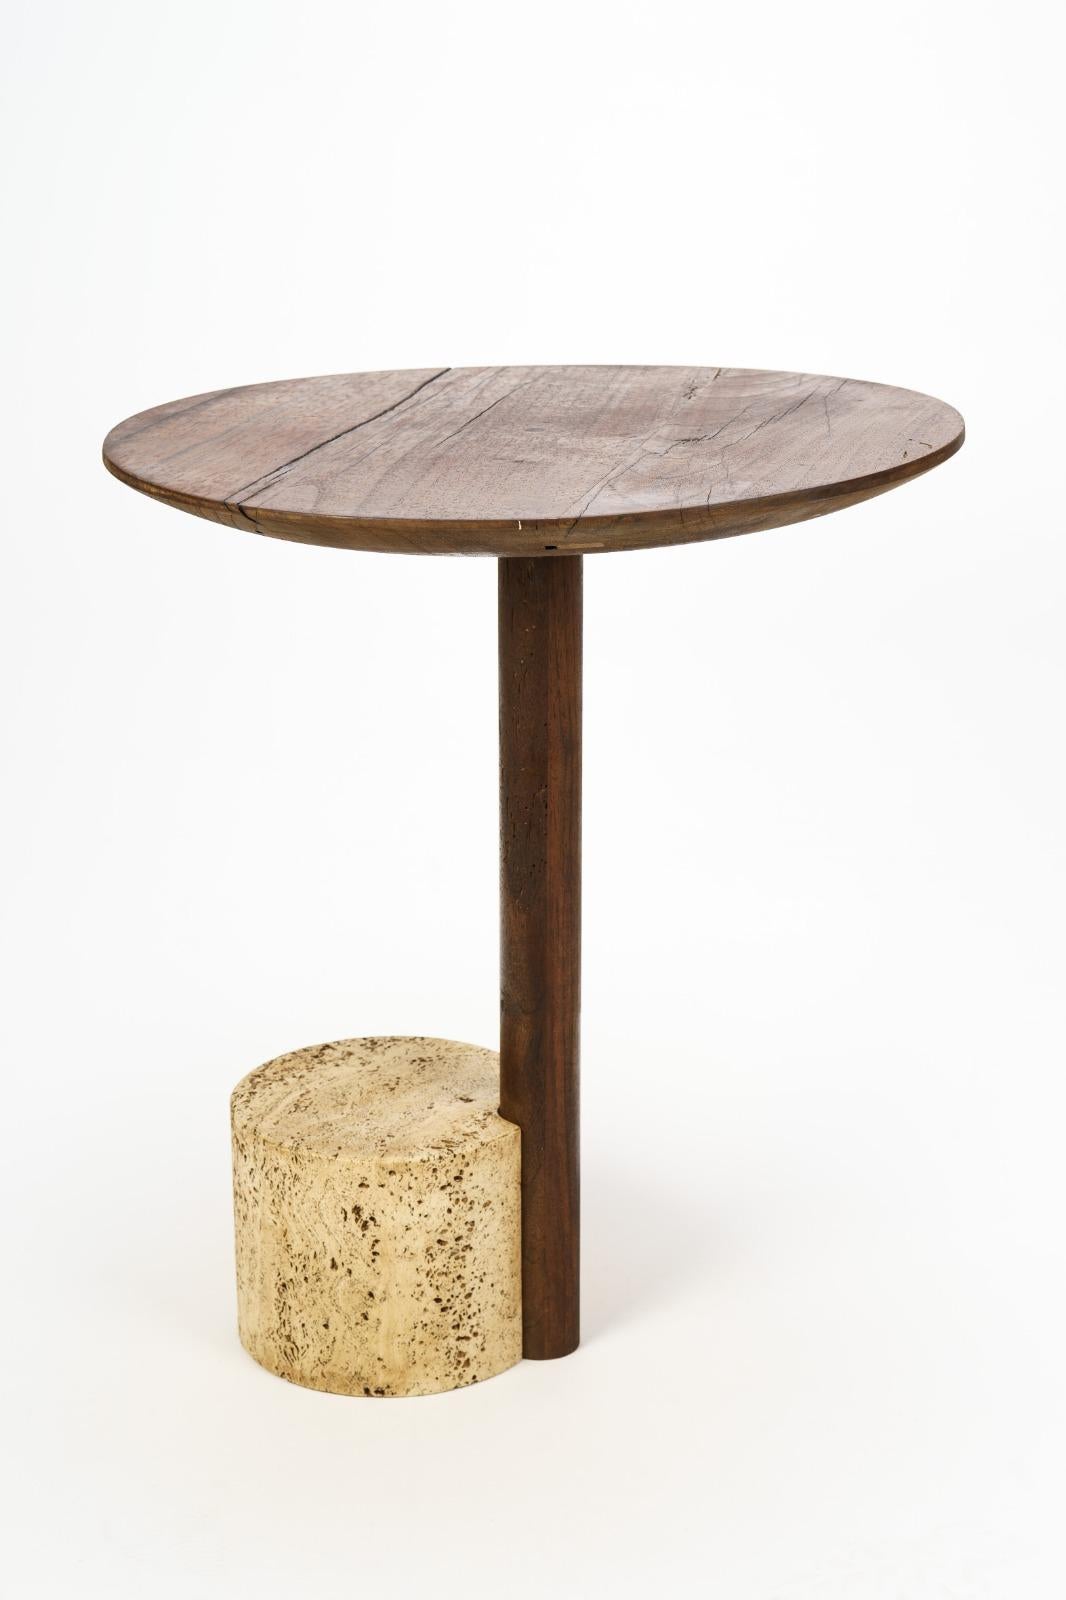 Hand-Crafted Medioeval Wood Ancient Roman Travertine End Table, 200 Dc, Wood 1150 For Sale